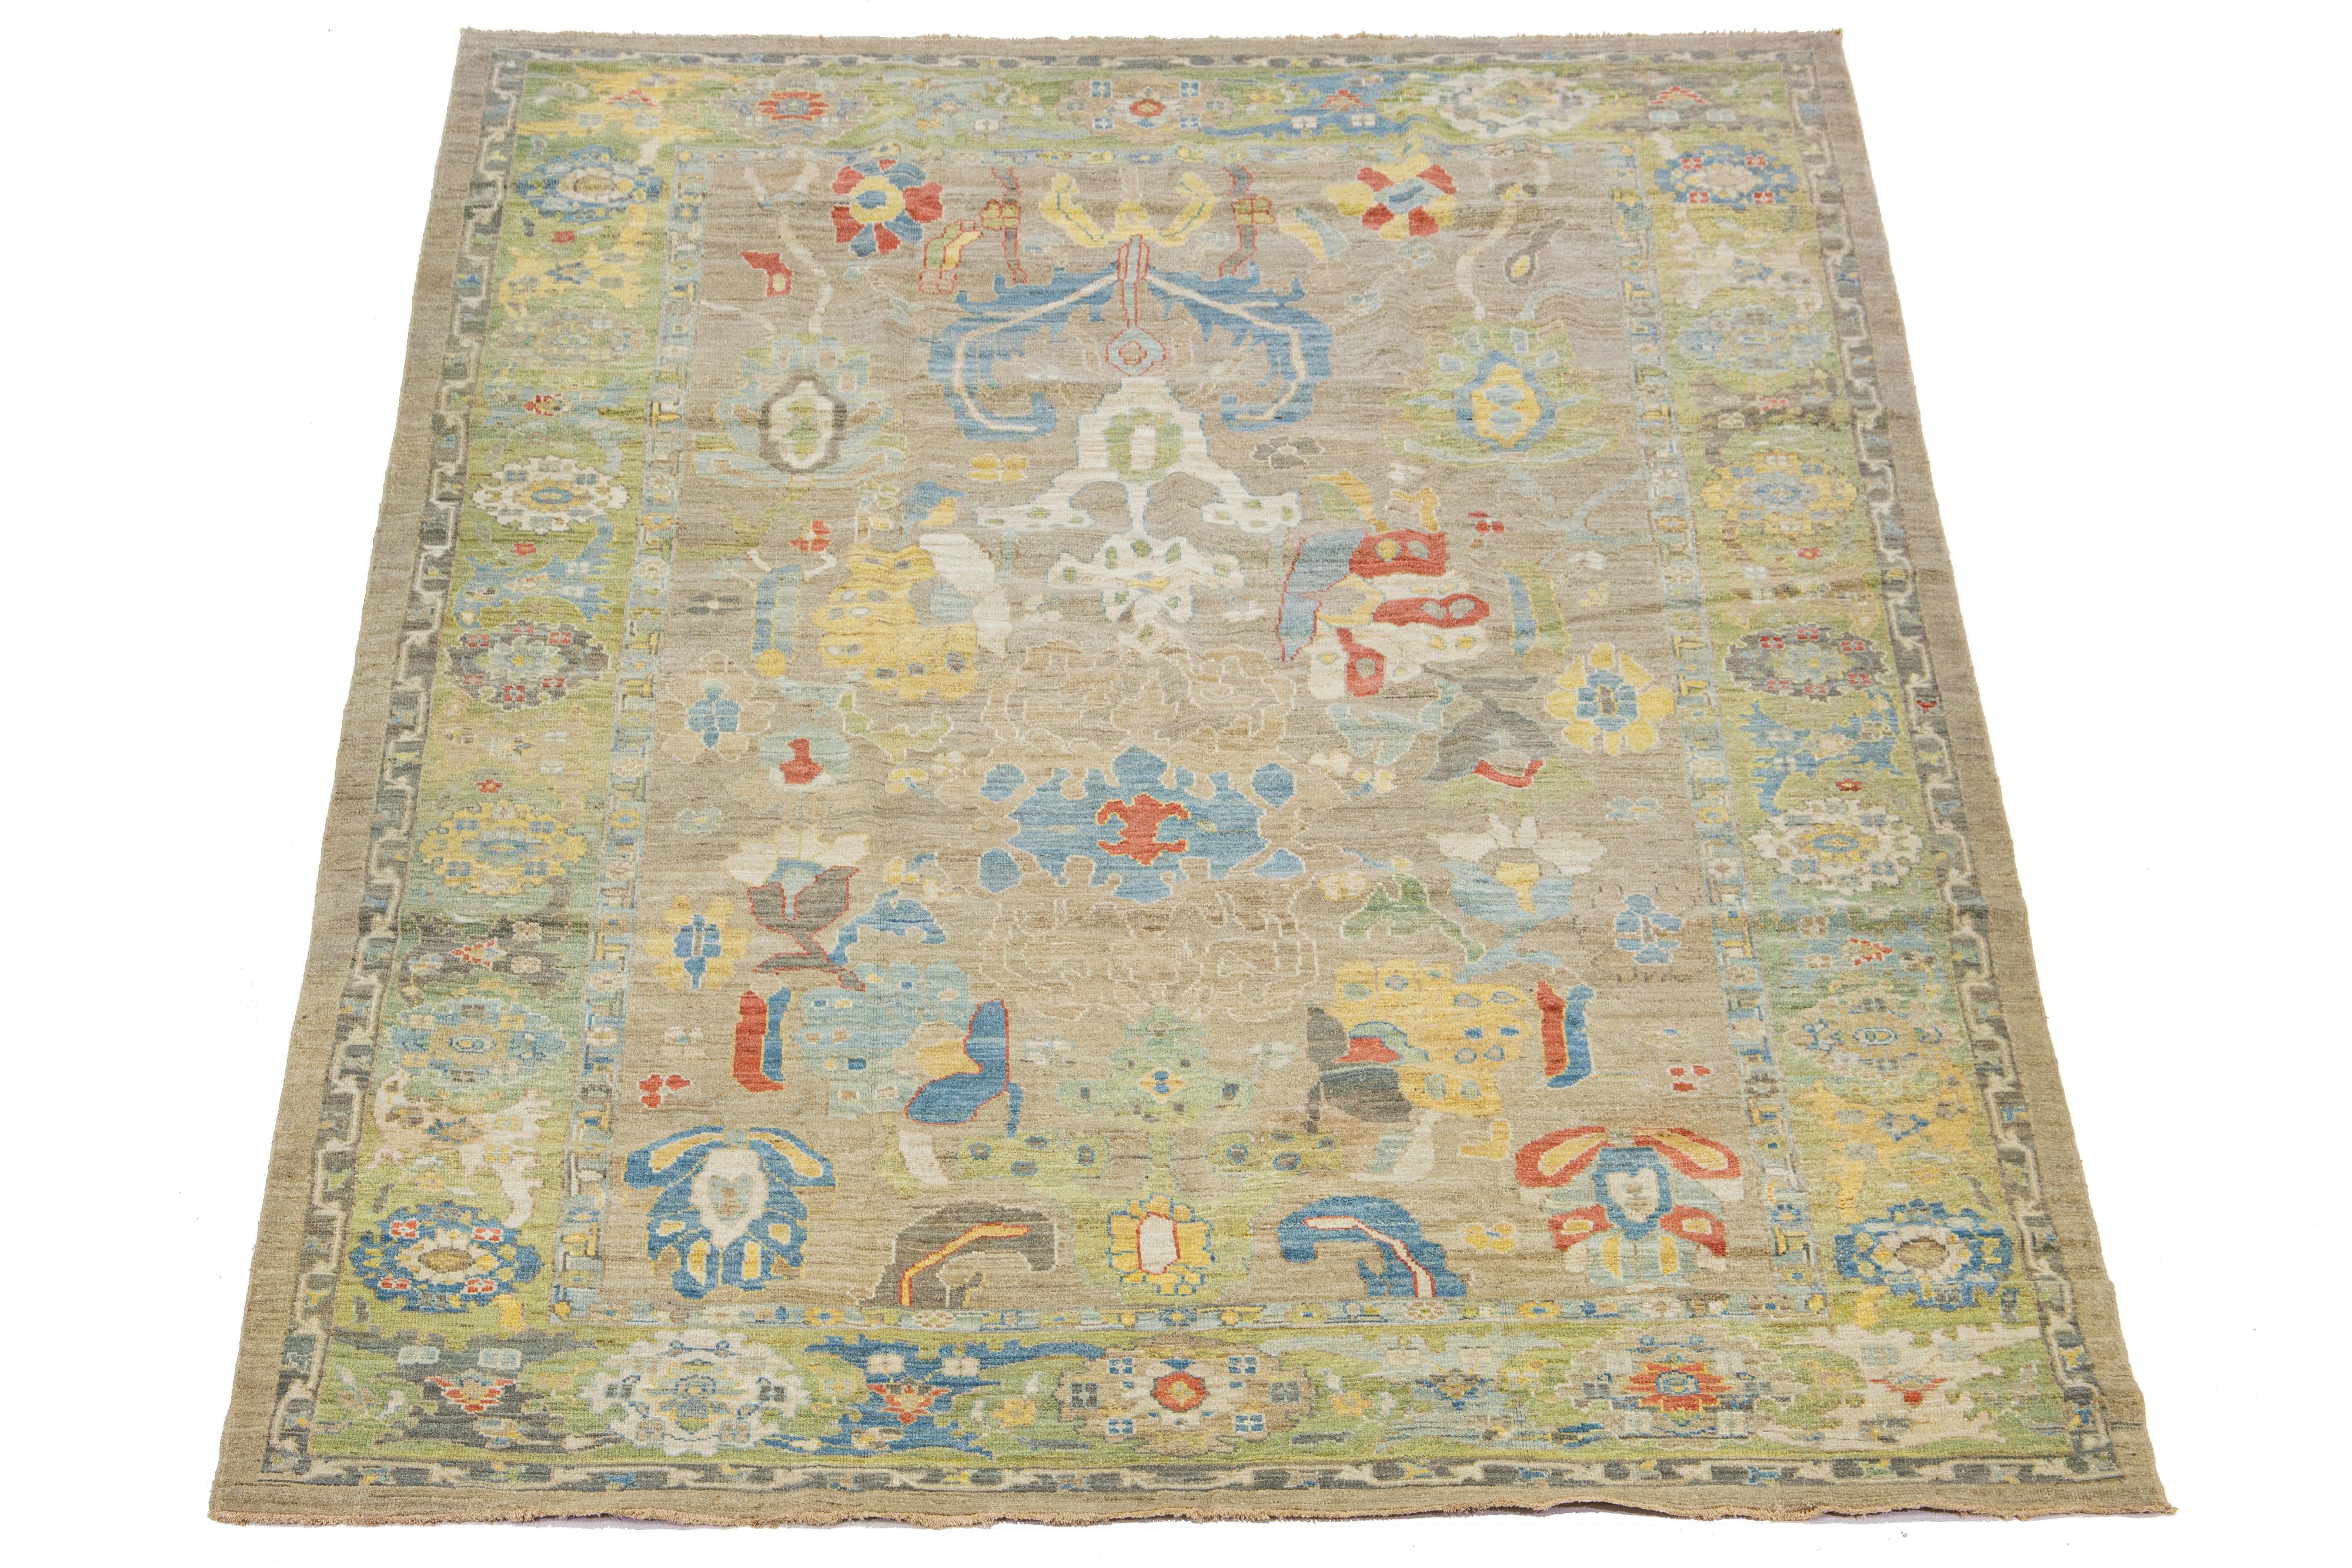 Beautiful modern Sultanabad hand-knotted wool rug with a light brown field. This Sultanabad rug has a green frame and multicolor accents in a gorgeous all-over classic floral pattern design.

This rug measures 8'10